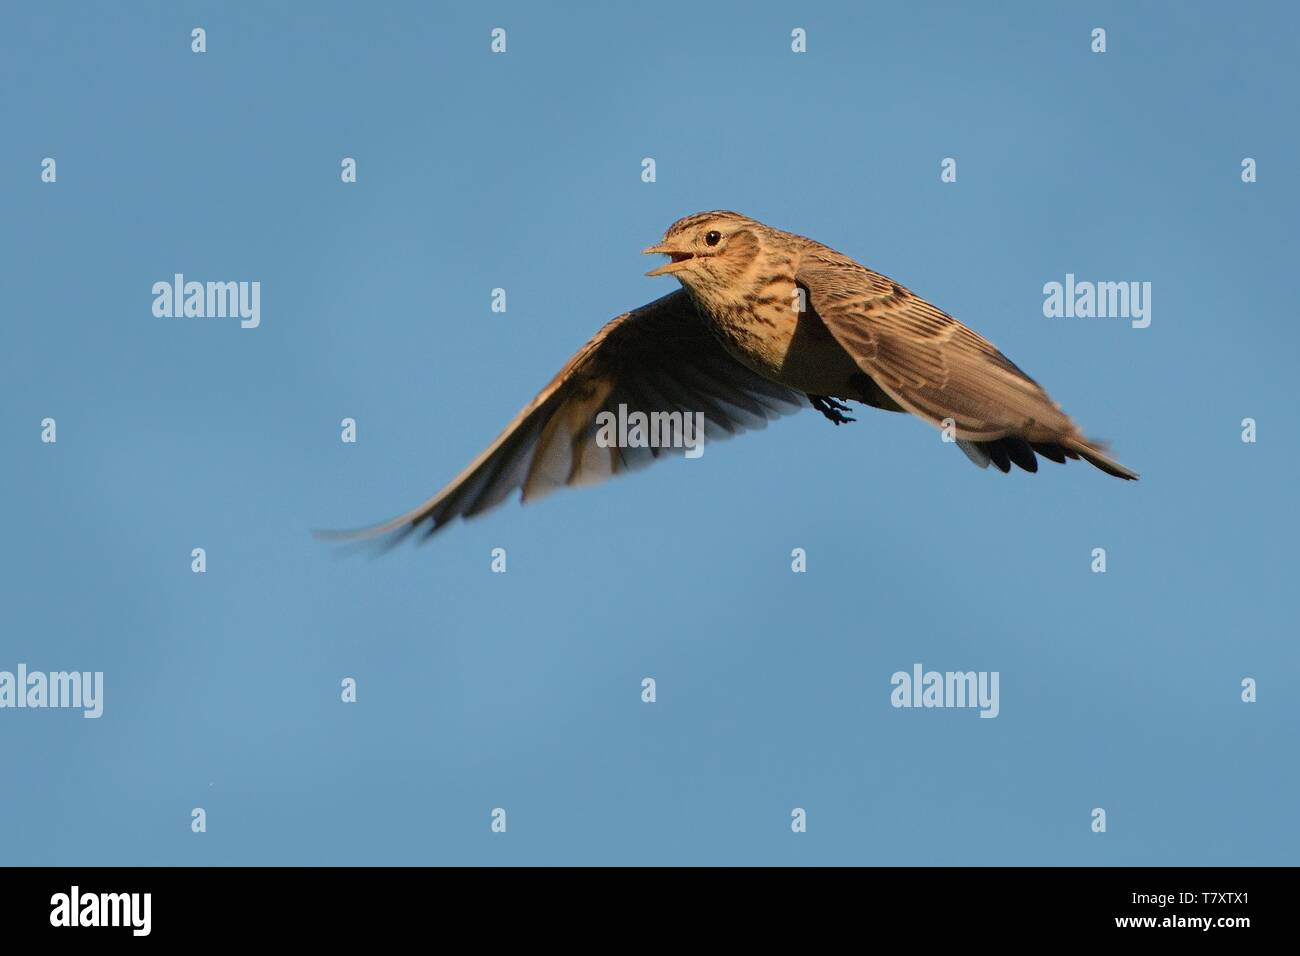 Sky Lark (Alauda arvensis) flying over the field with brown and blue backgrond. Brown bird captured in flight enlightened by evening sun. Stock Photo